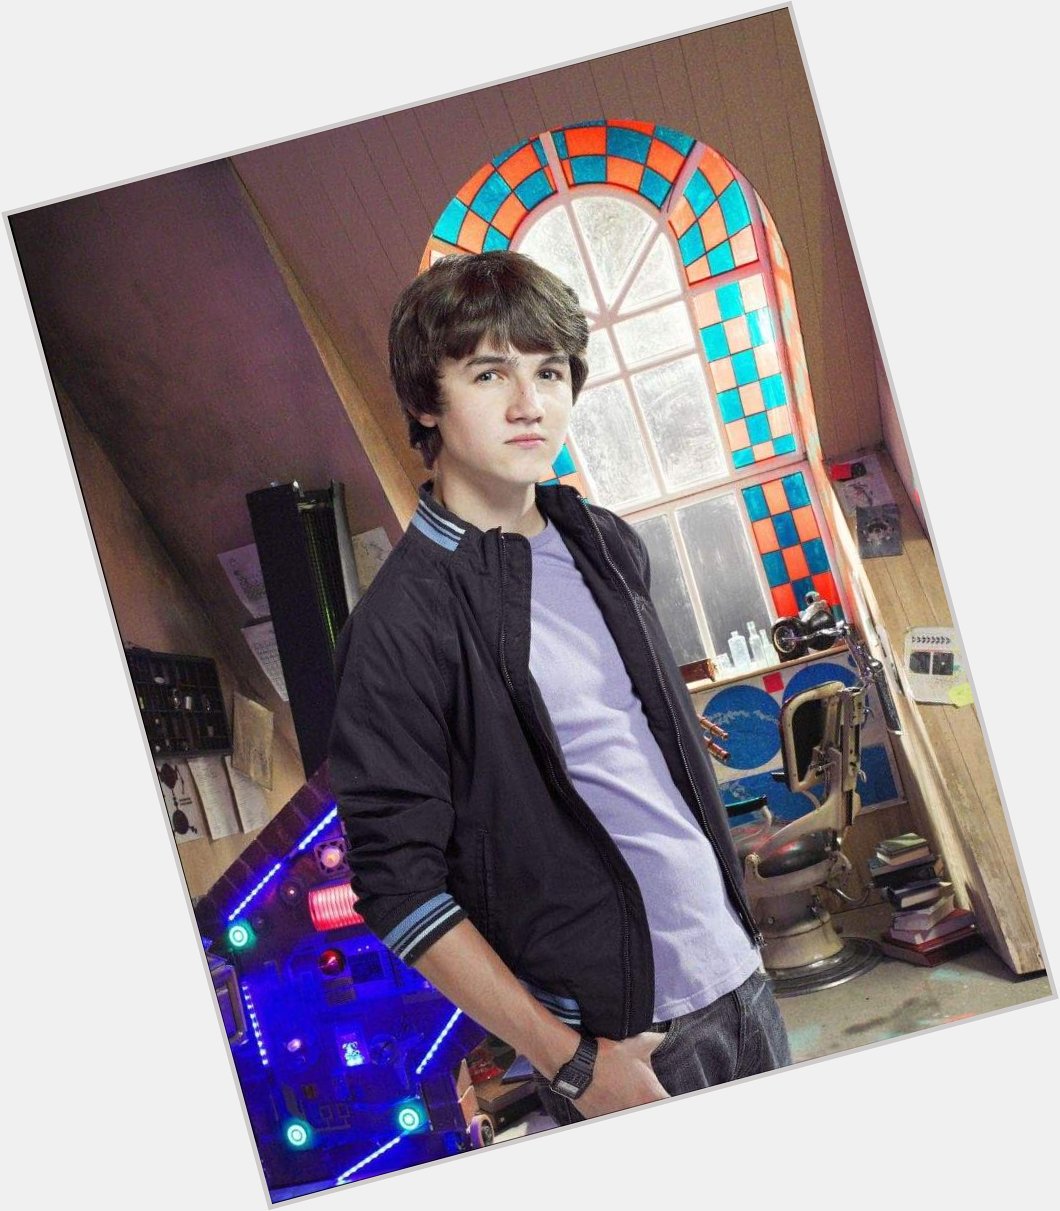  Happy Birthday to Tommy Knight who played Luke Smith in and Sarah Jane Adventures.   